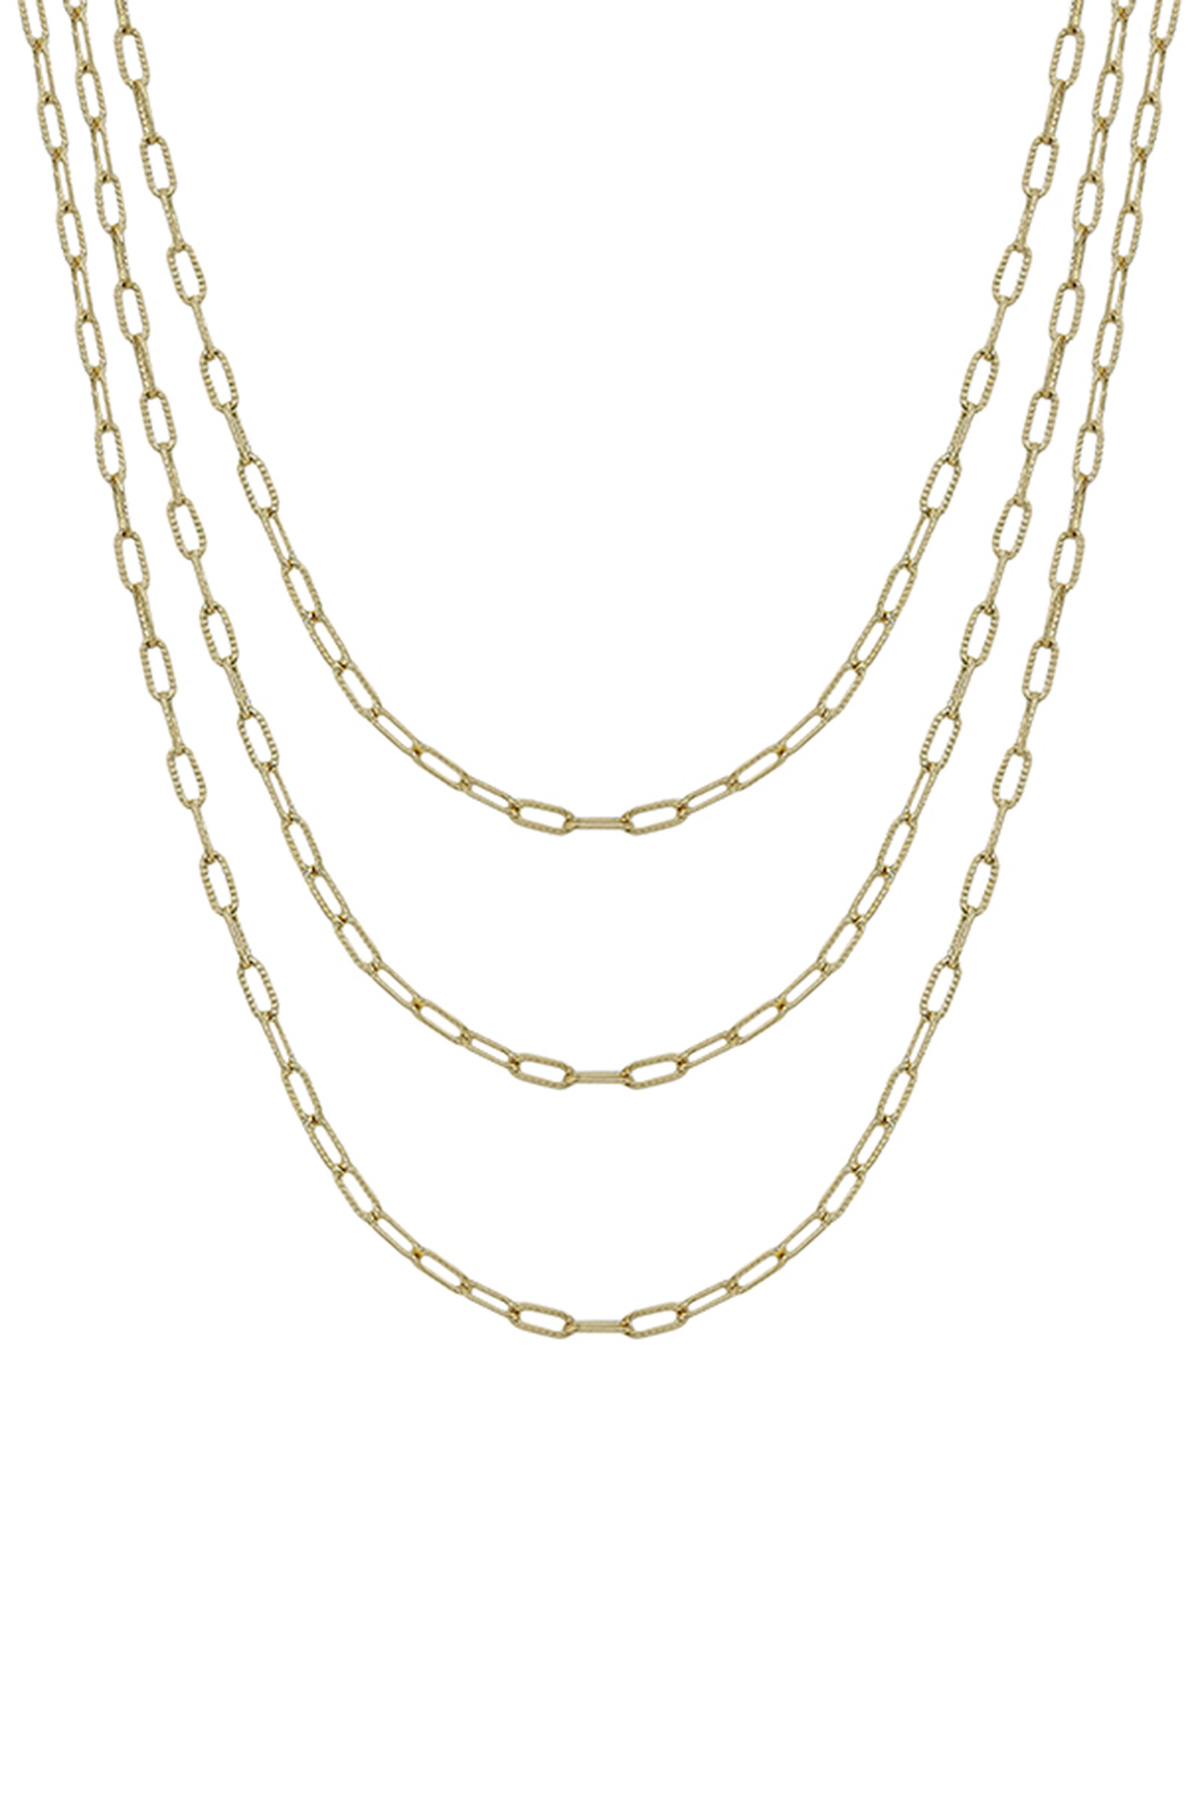 3 LAYERED CLIP CHAIN SHORT NECKLACE